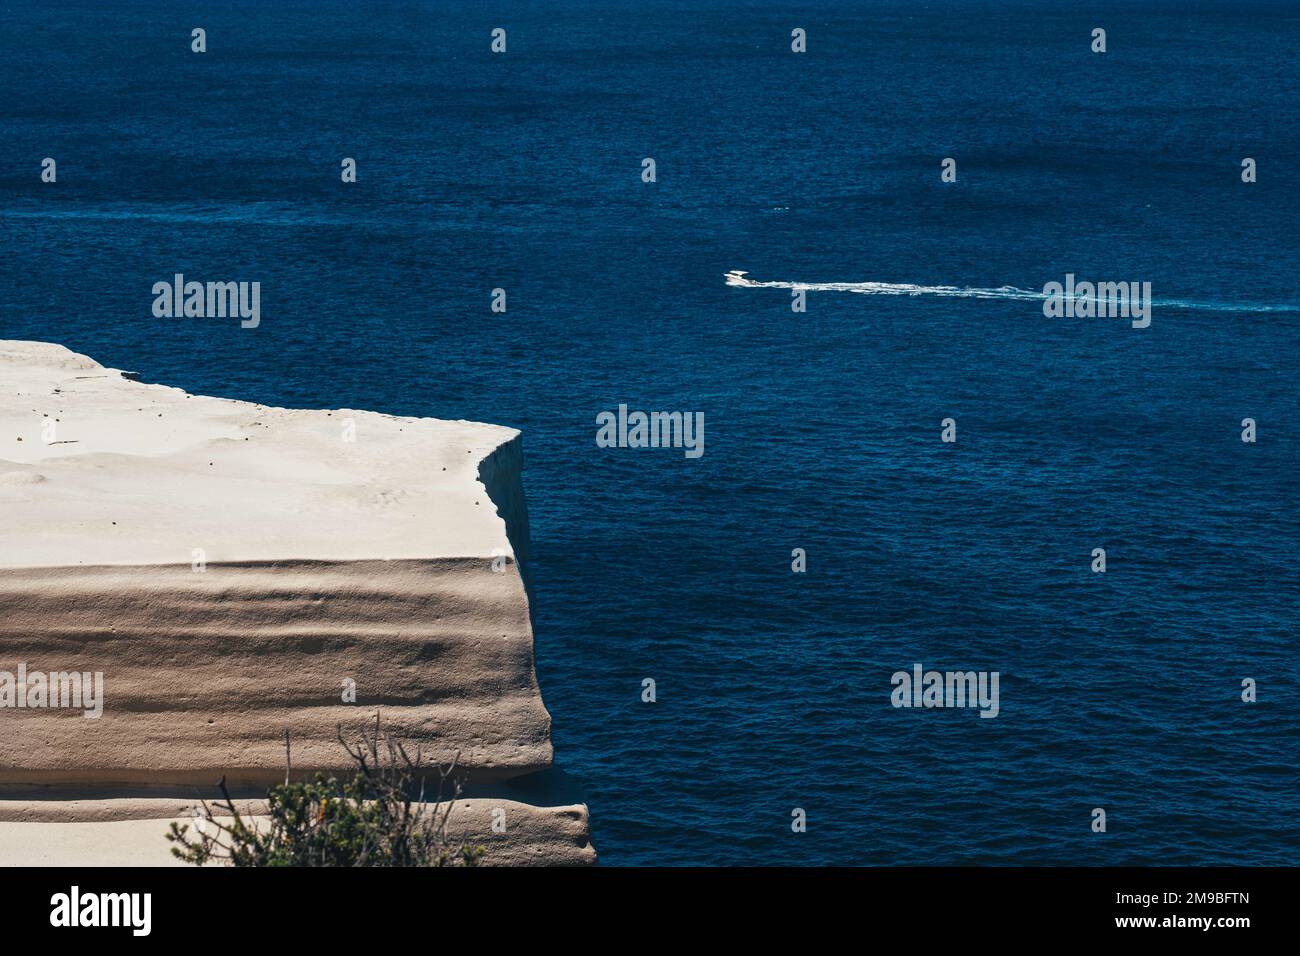 A scenic view of a a tranquil blue sea at the Wedding Cake Rock beach in Sydney on a summer day Stock Photo